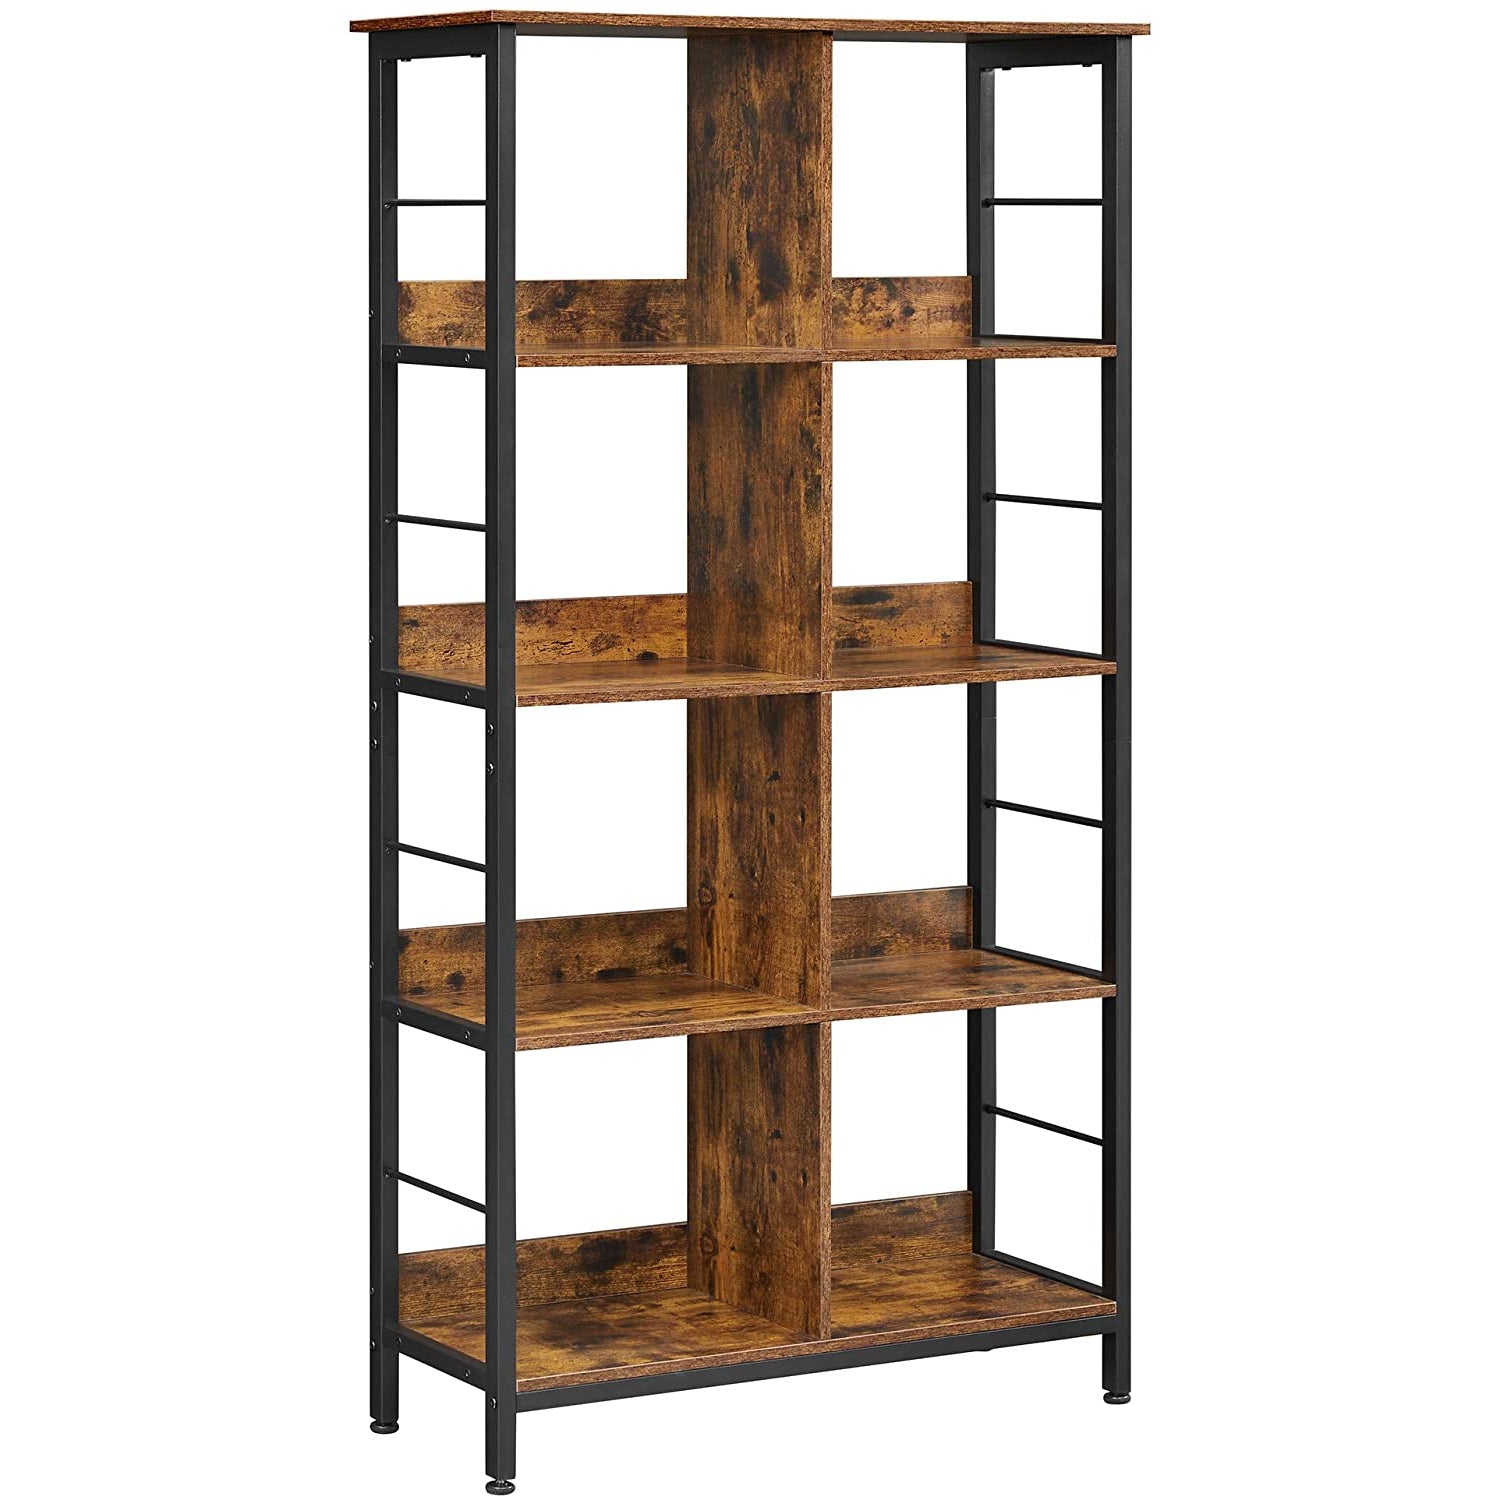 Nancy's Candyville Bookcase - Storage Cabinet - 8 Compartments - Brown - Processed Wood - Metal - 80 x 33 x 149 cm